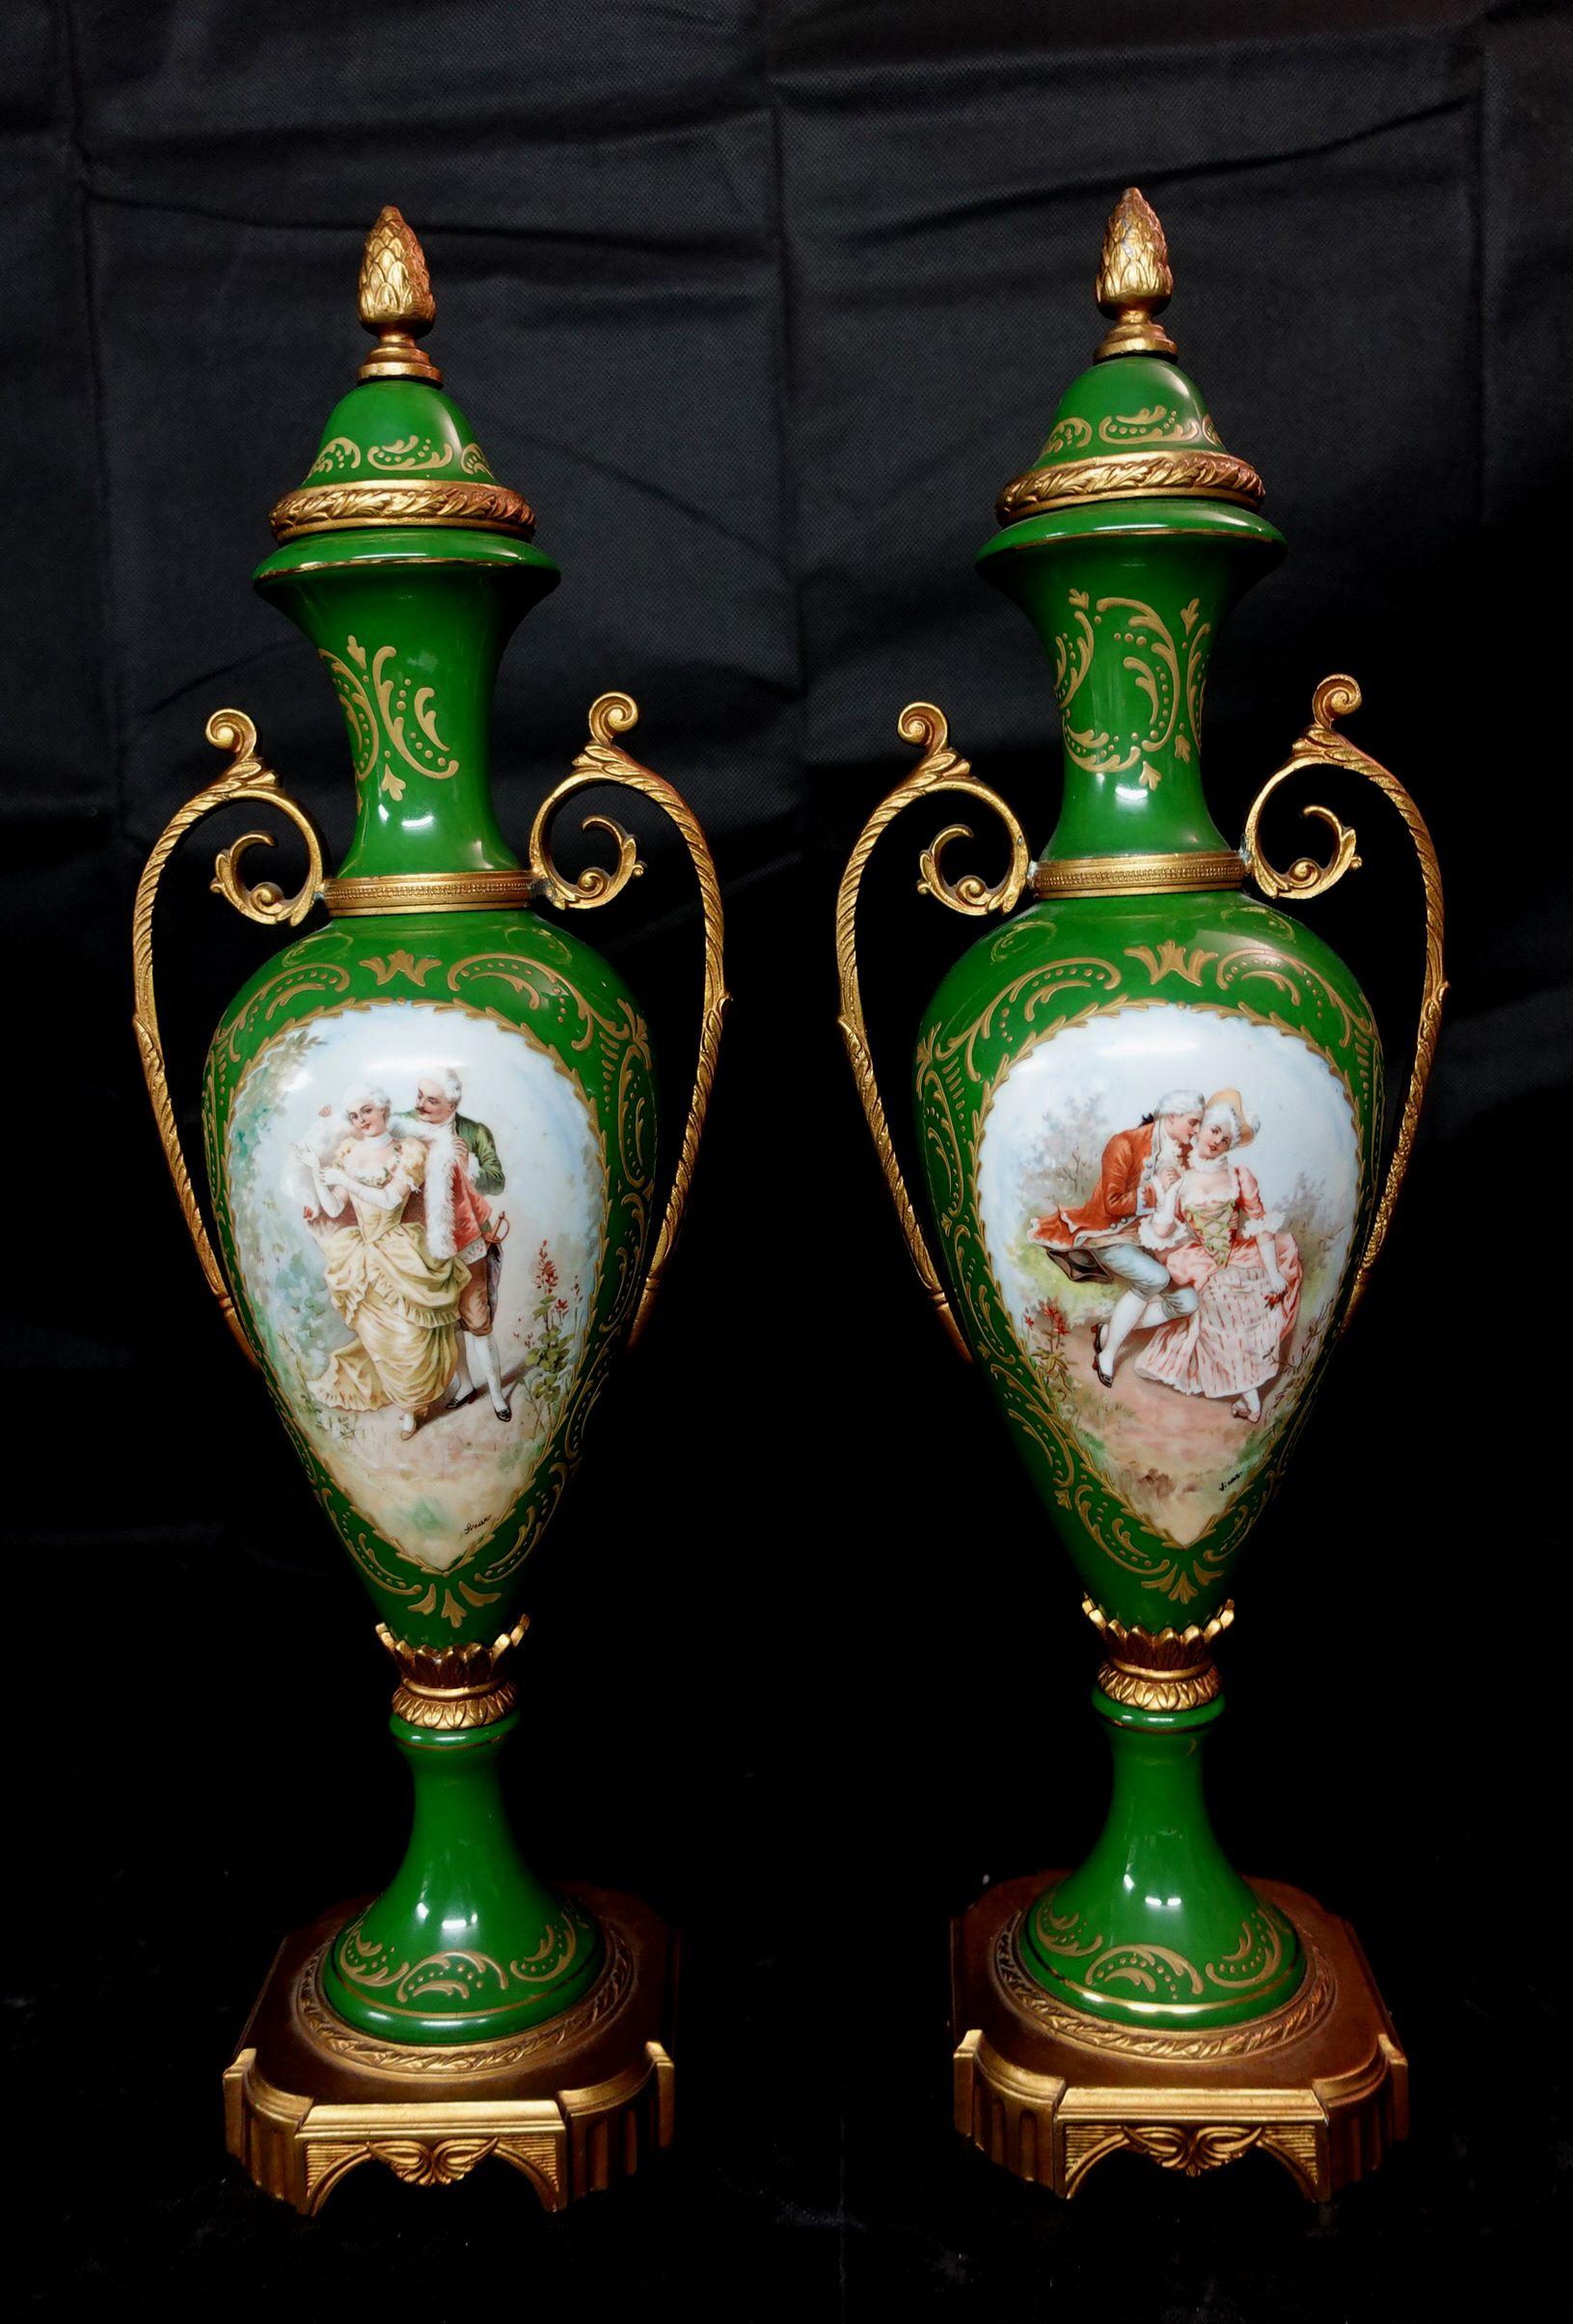 Antique a pair of matching green bolted urns with amorous scenes and with gilt metal mounts and gilt highlights. Beautiful hand-painted royal figures at the centers of both vases, made in Czechoslovakia.



